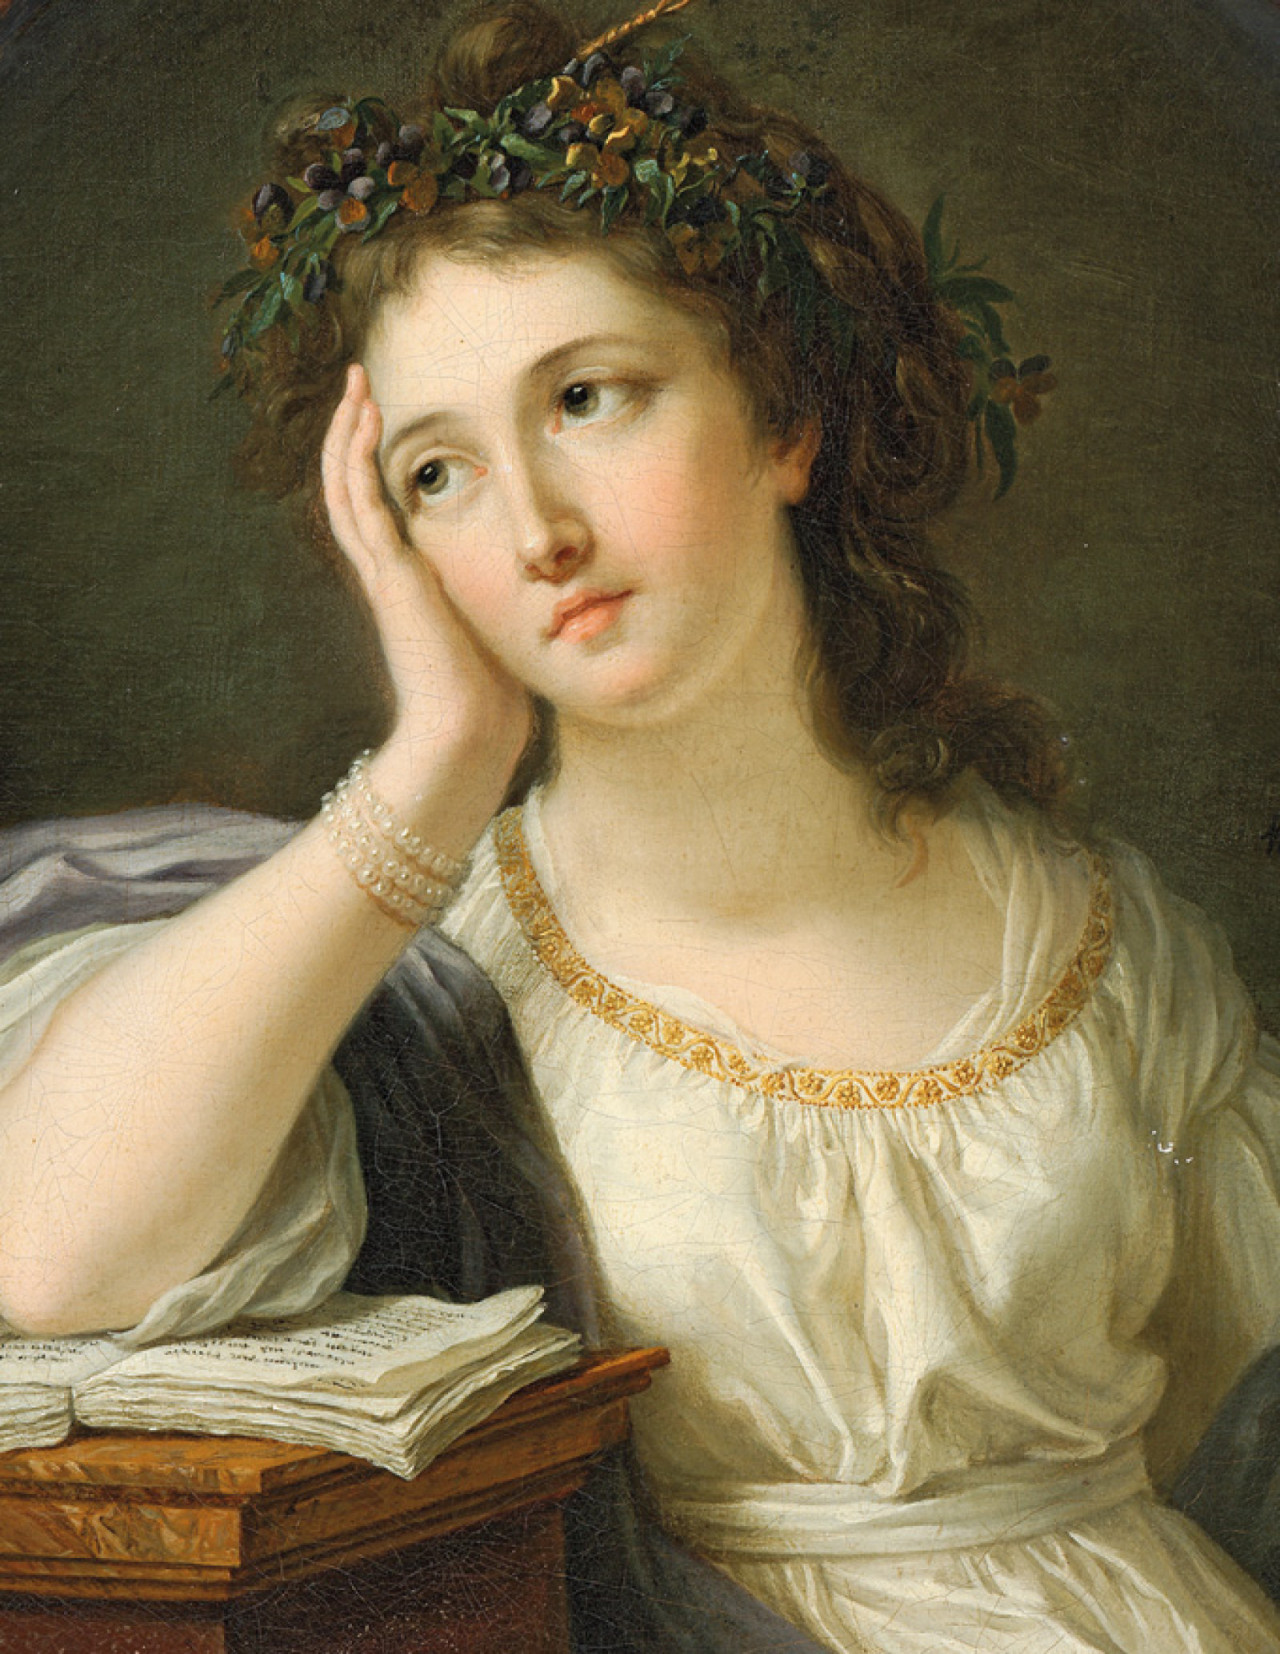 Young woman leaning on a book, detail (1784). Anne Vallayer-Coster (French, 1744-1818).
Vallayer-Coster received early recognition of her career after being elected as an associate and a full member of the Royal Académie in 1770. She was exceptional...